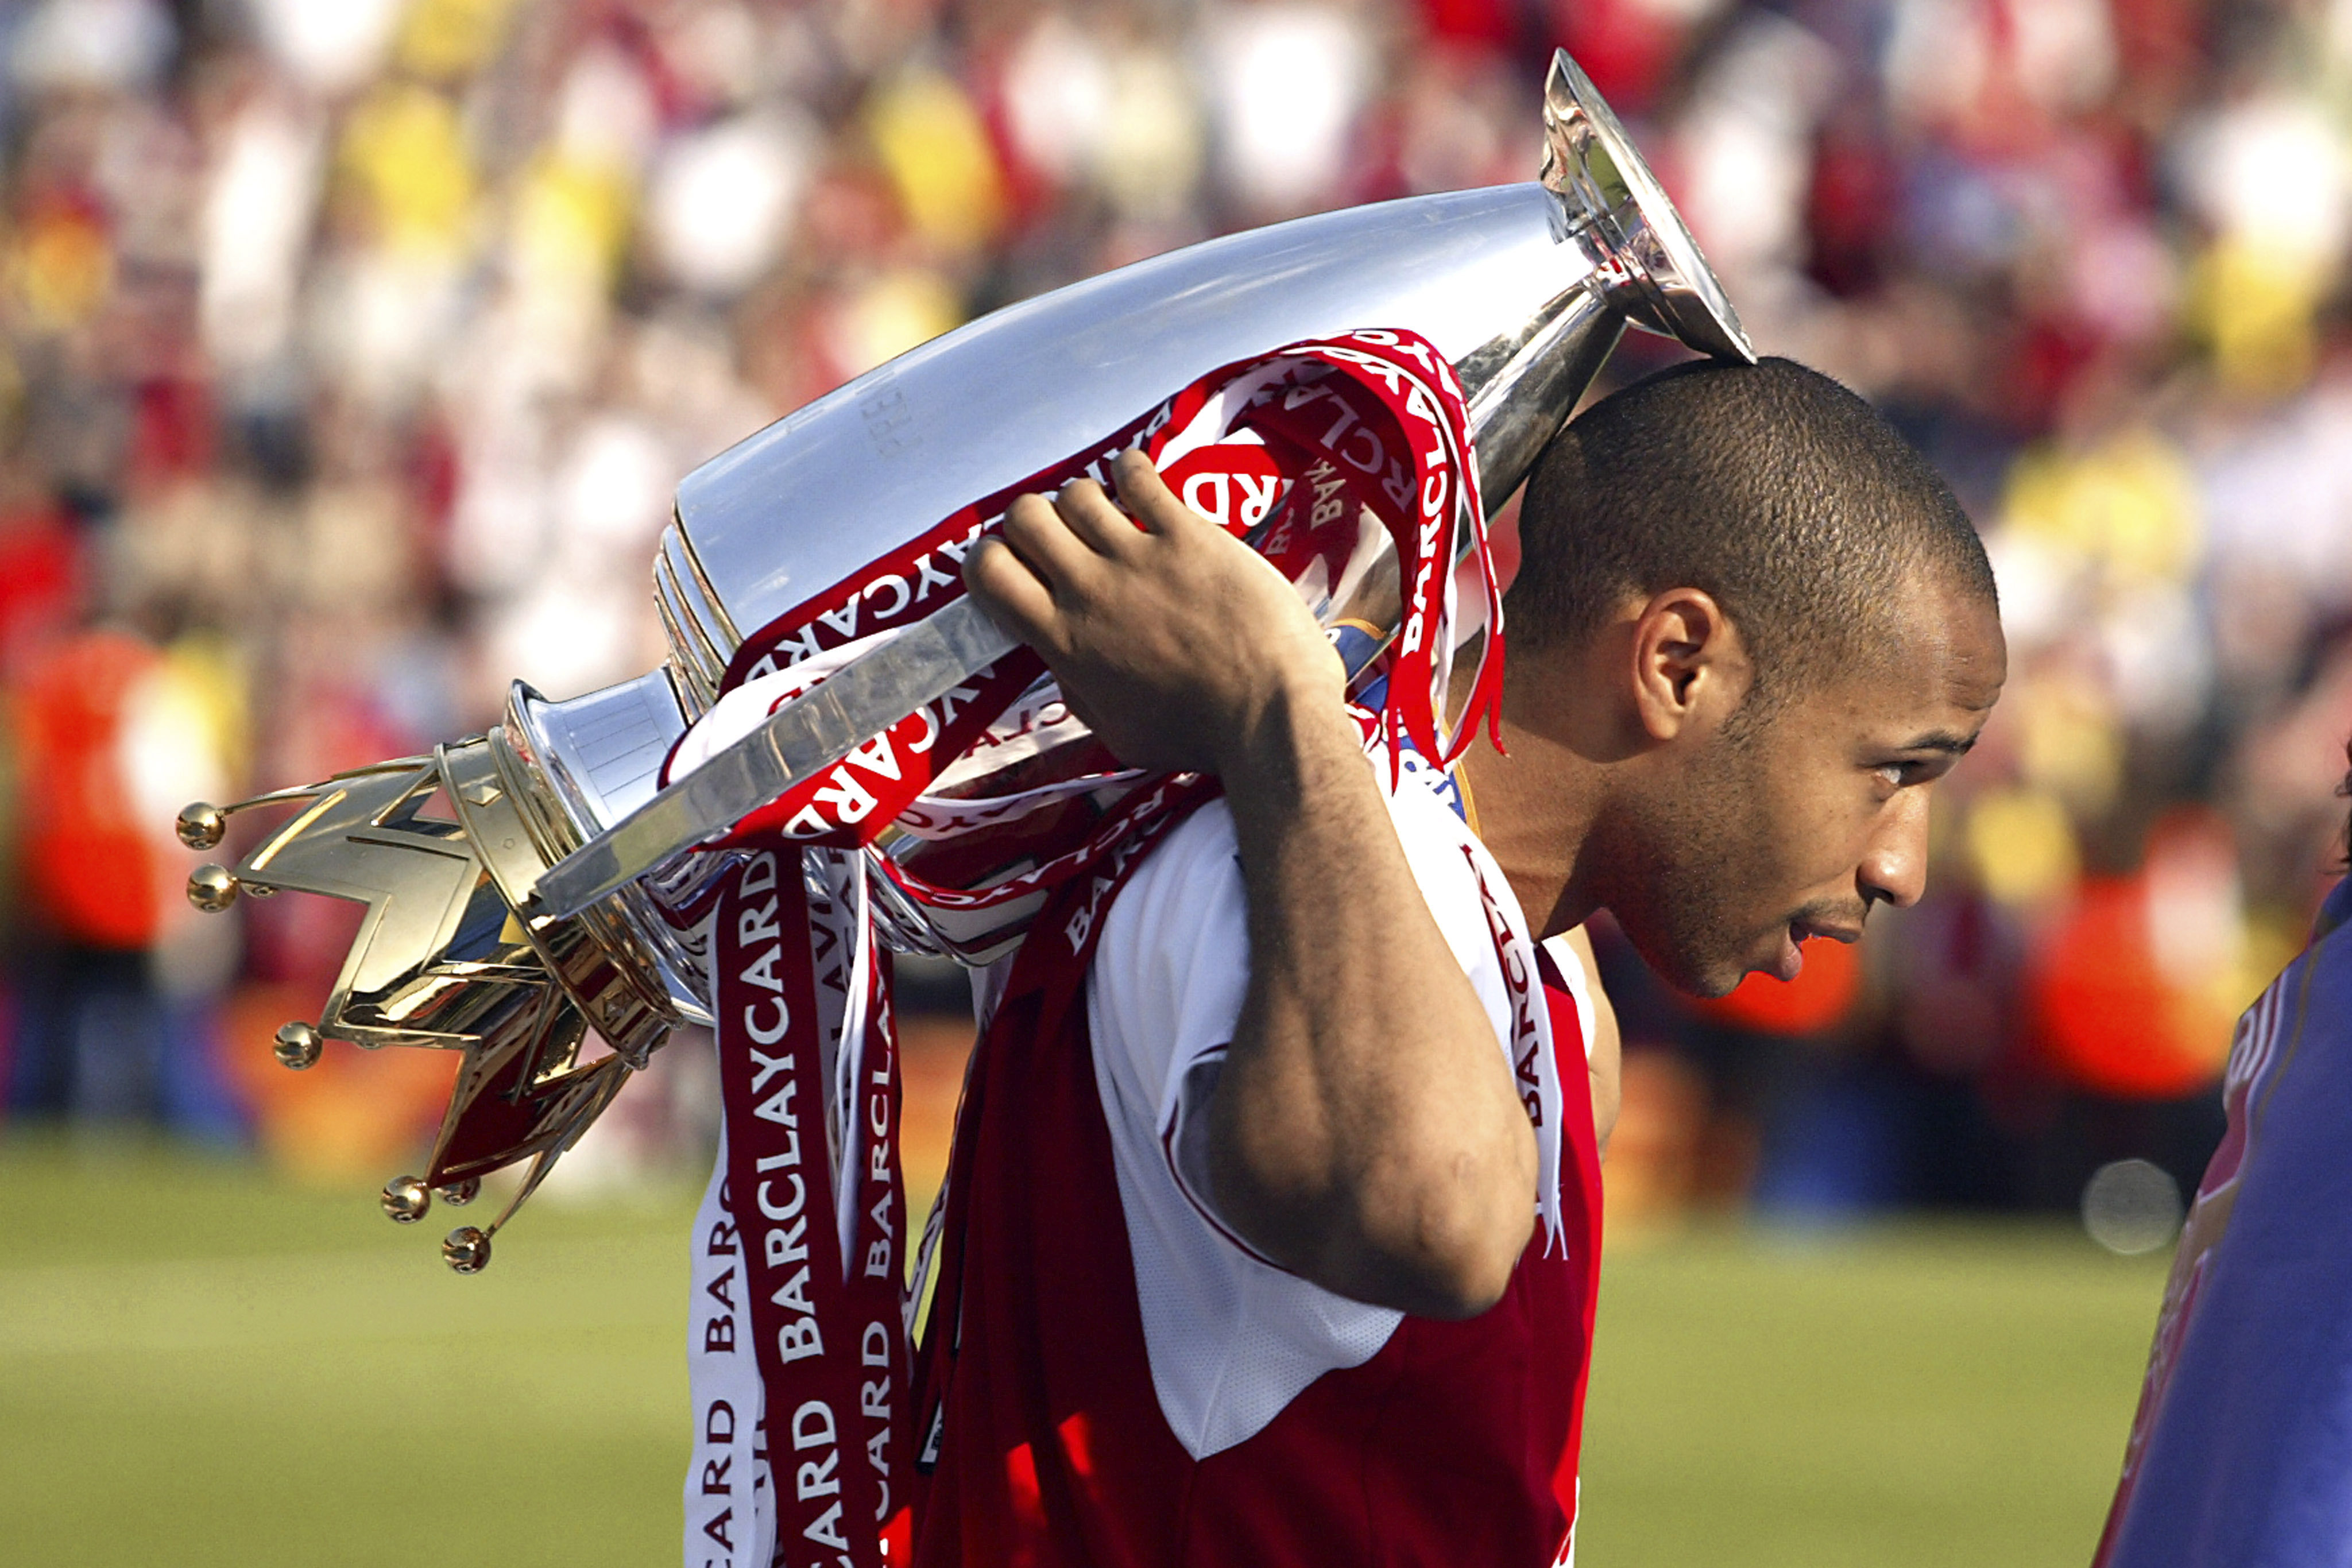 Thierry Henry celebrates winning the Premier League with Arsenal